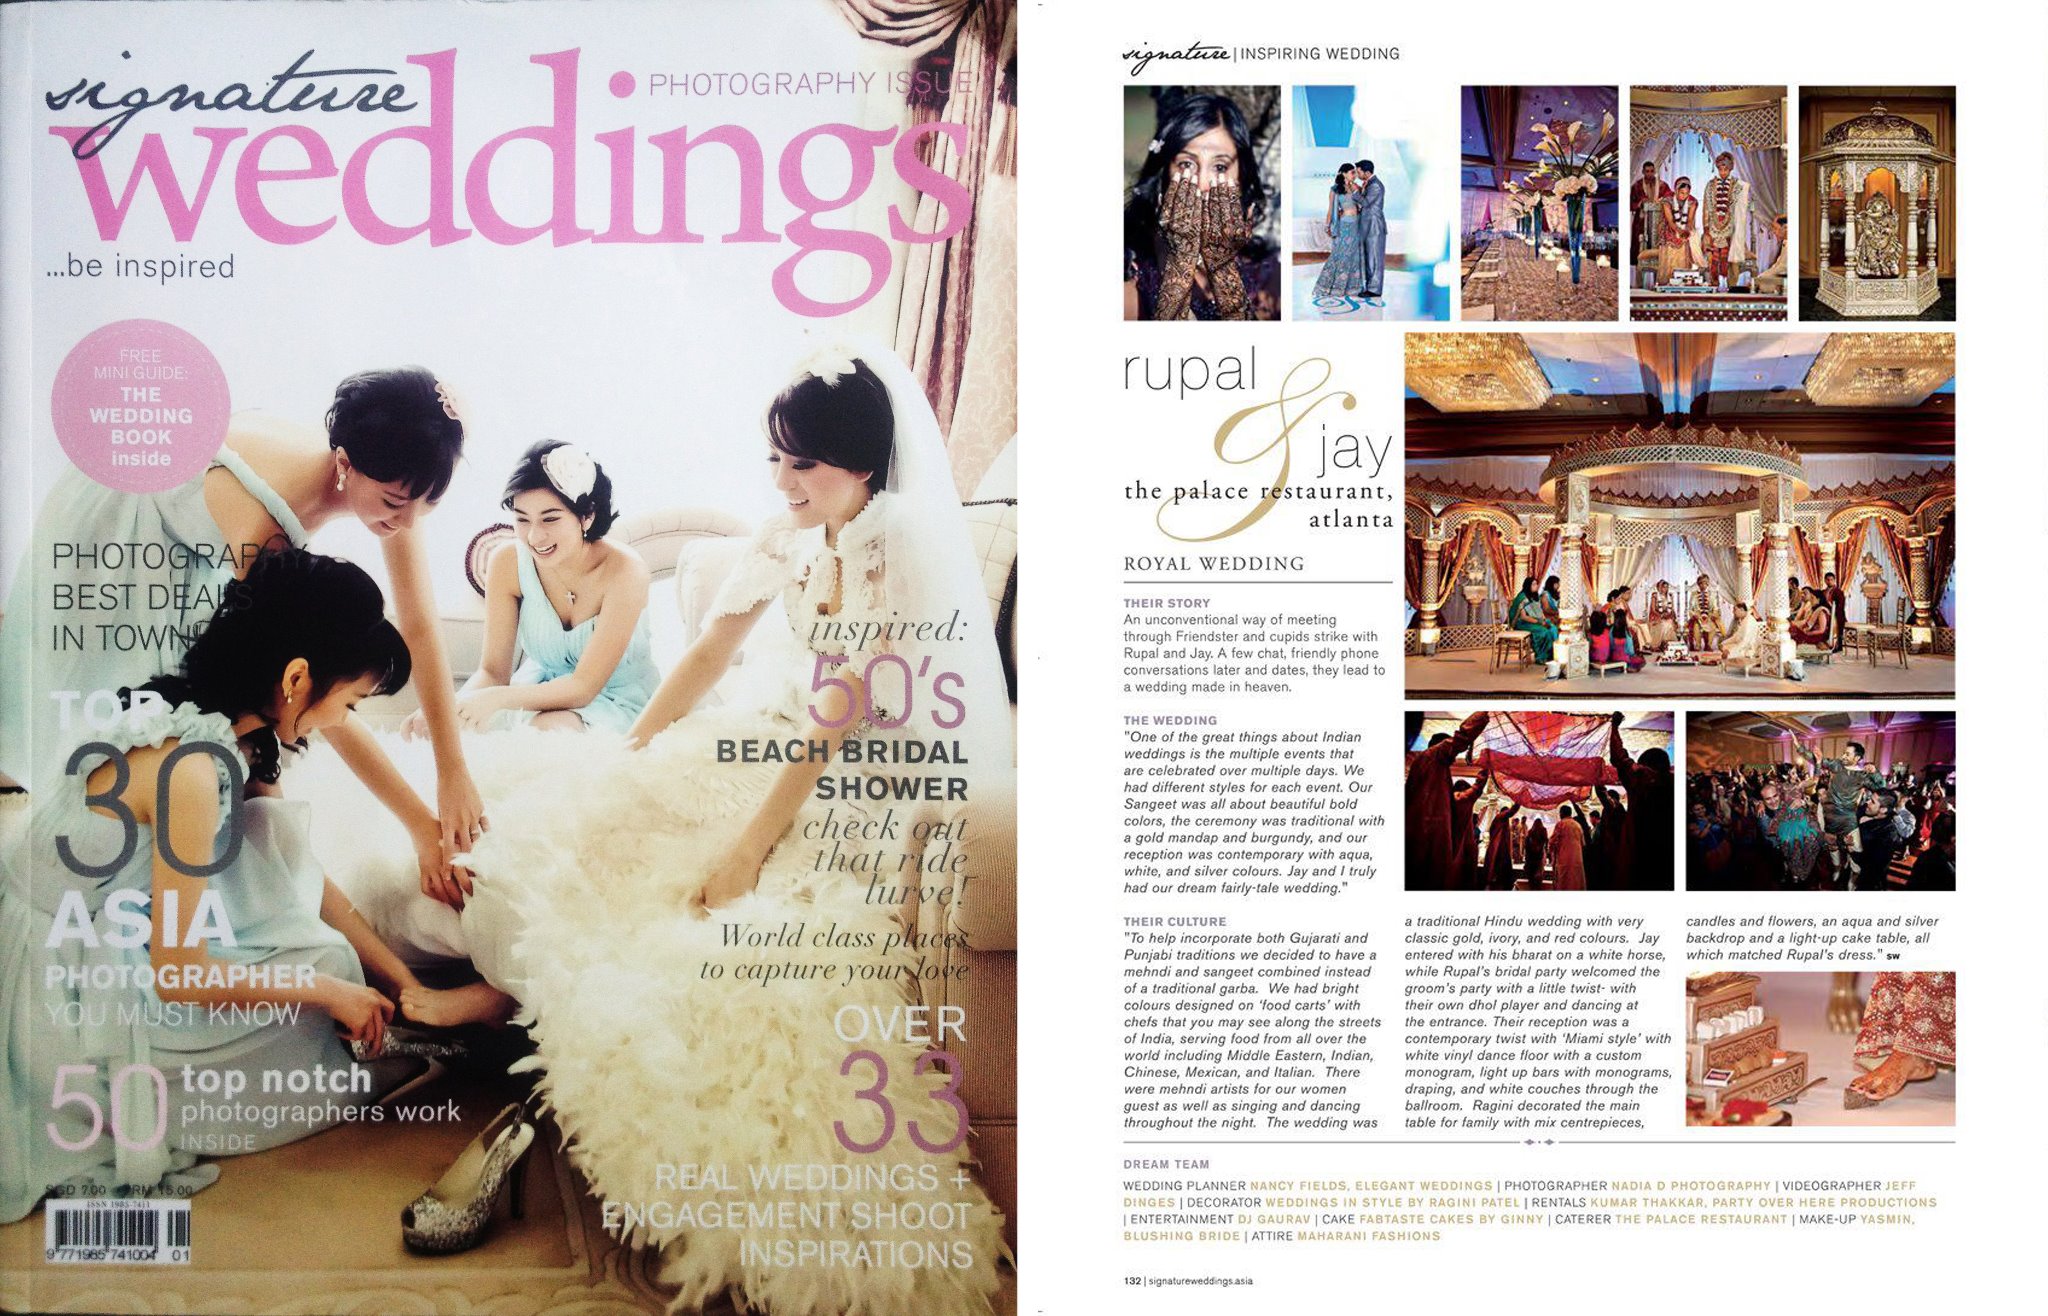 Signature Weddings features Nadia D Photography